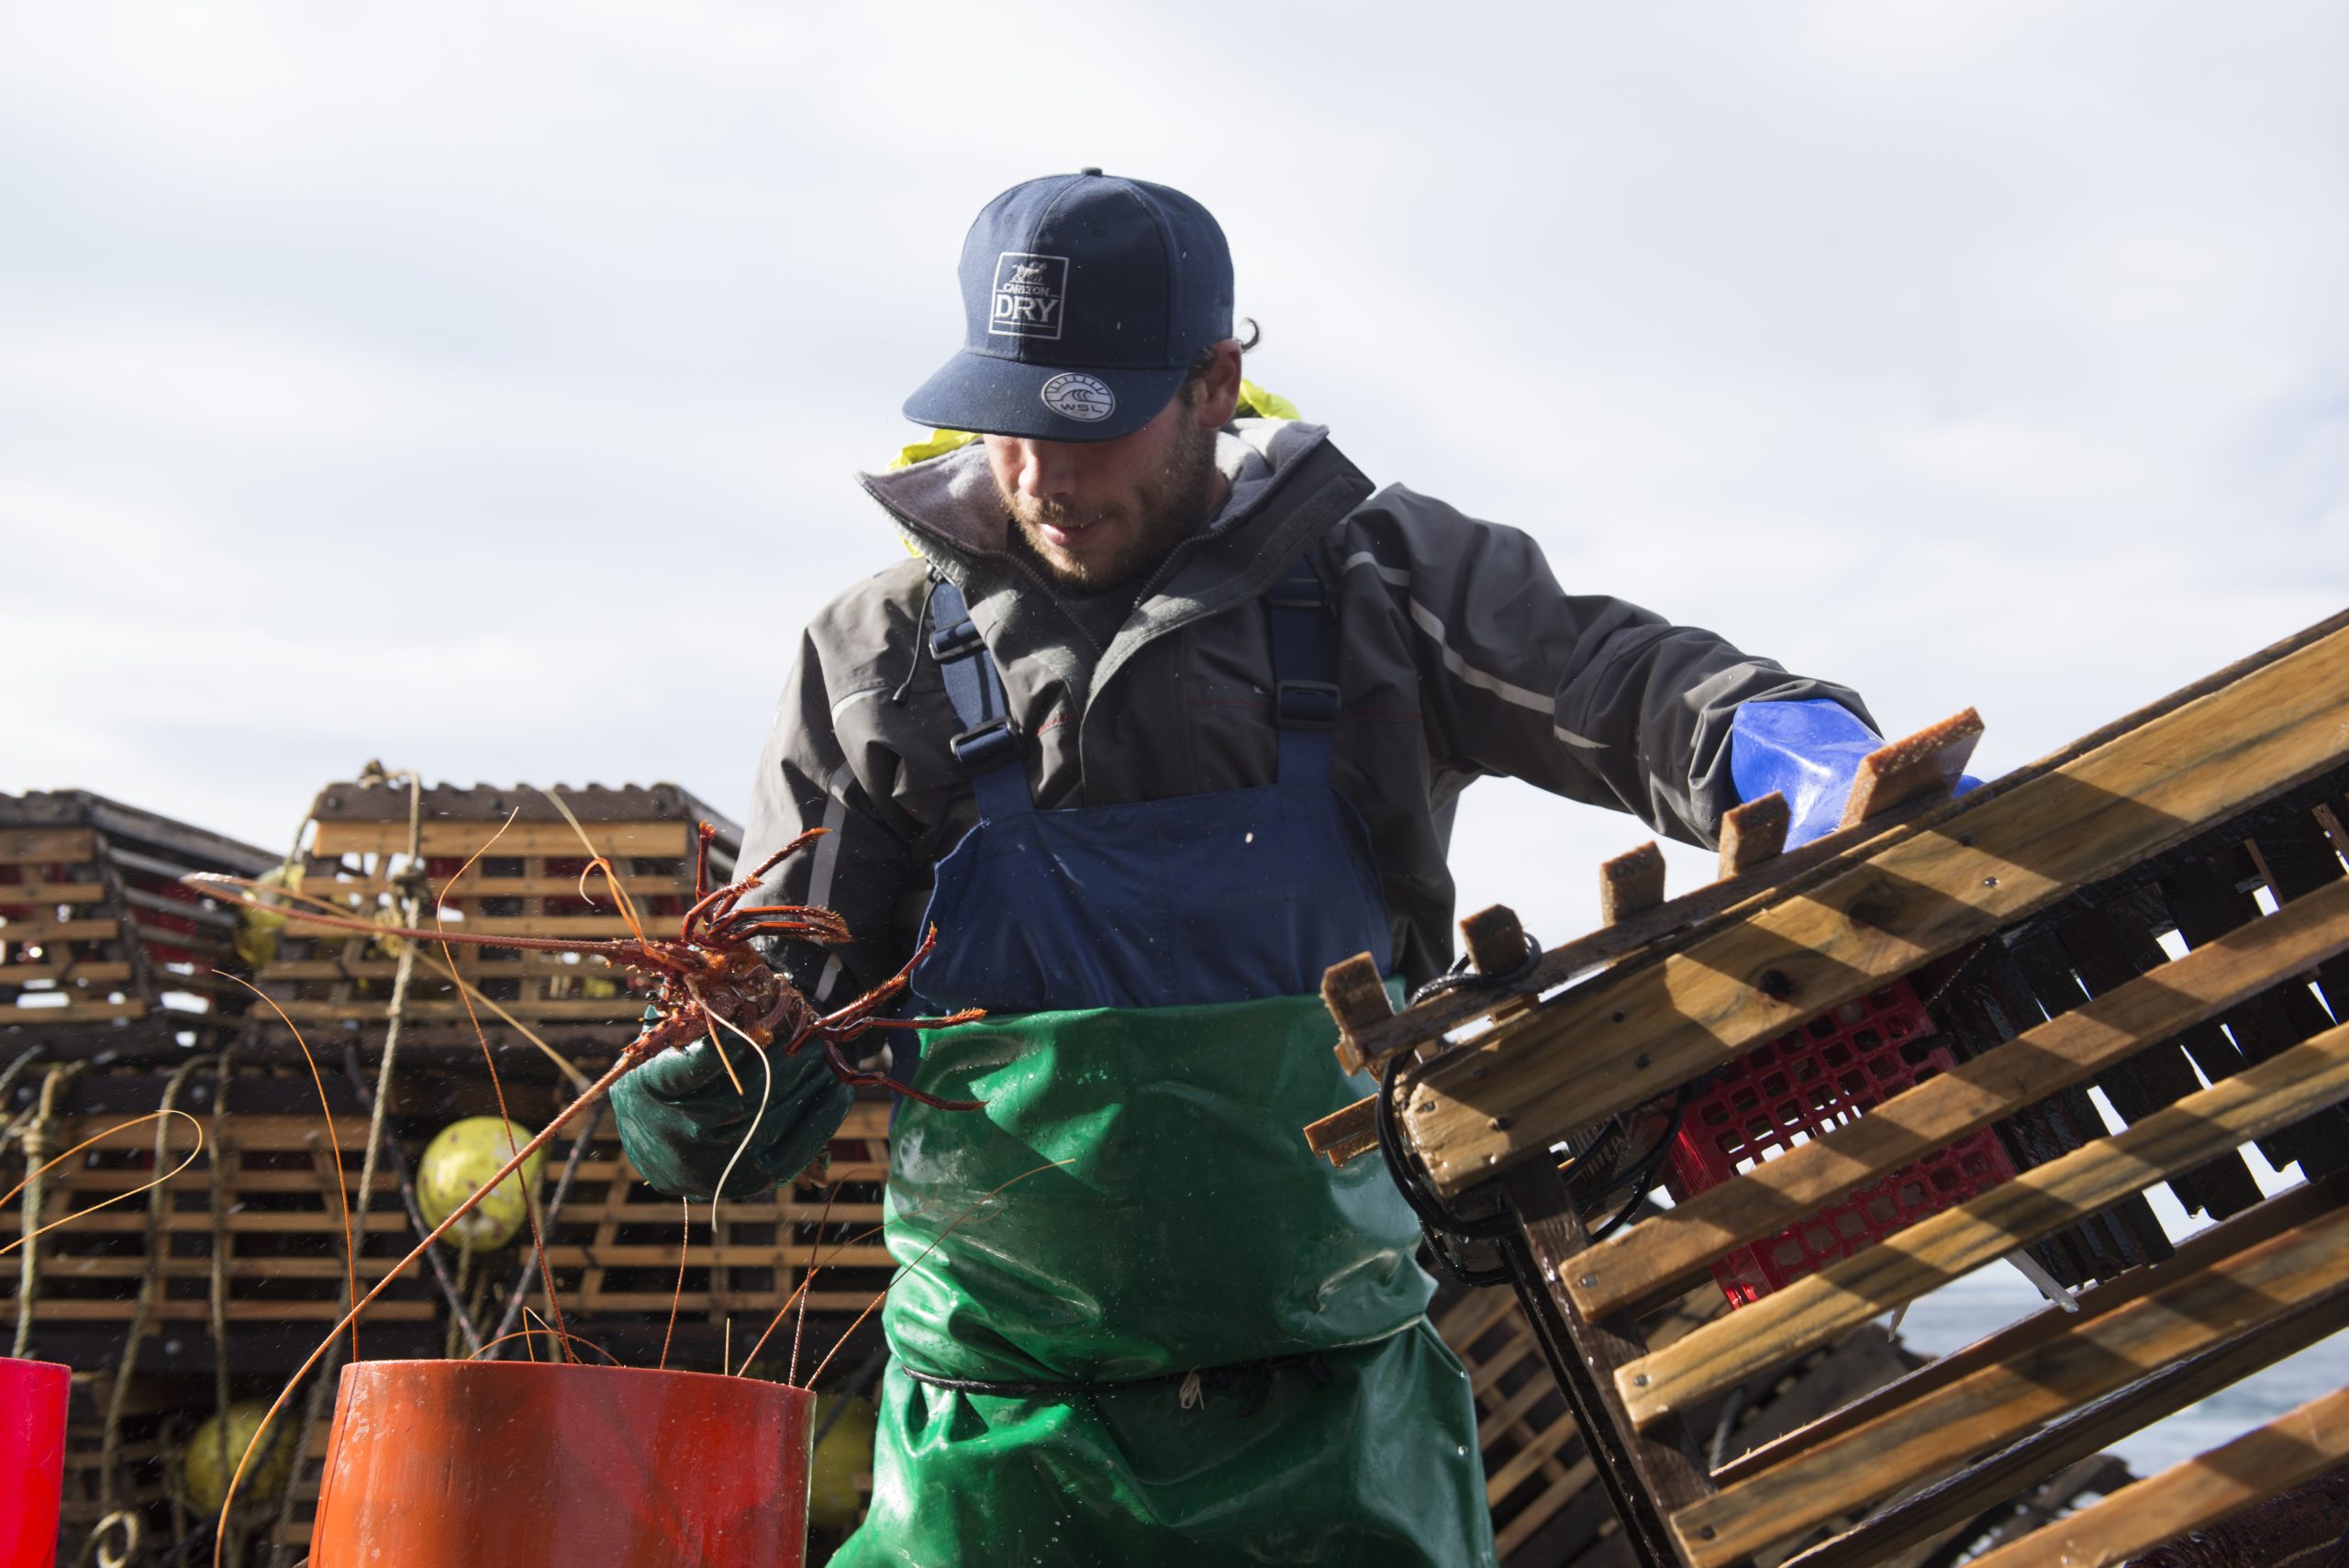 ‘Back to business’: Australian seafood industry buoyed by Federal support